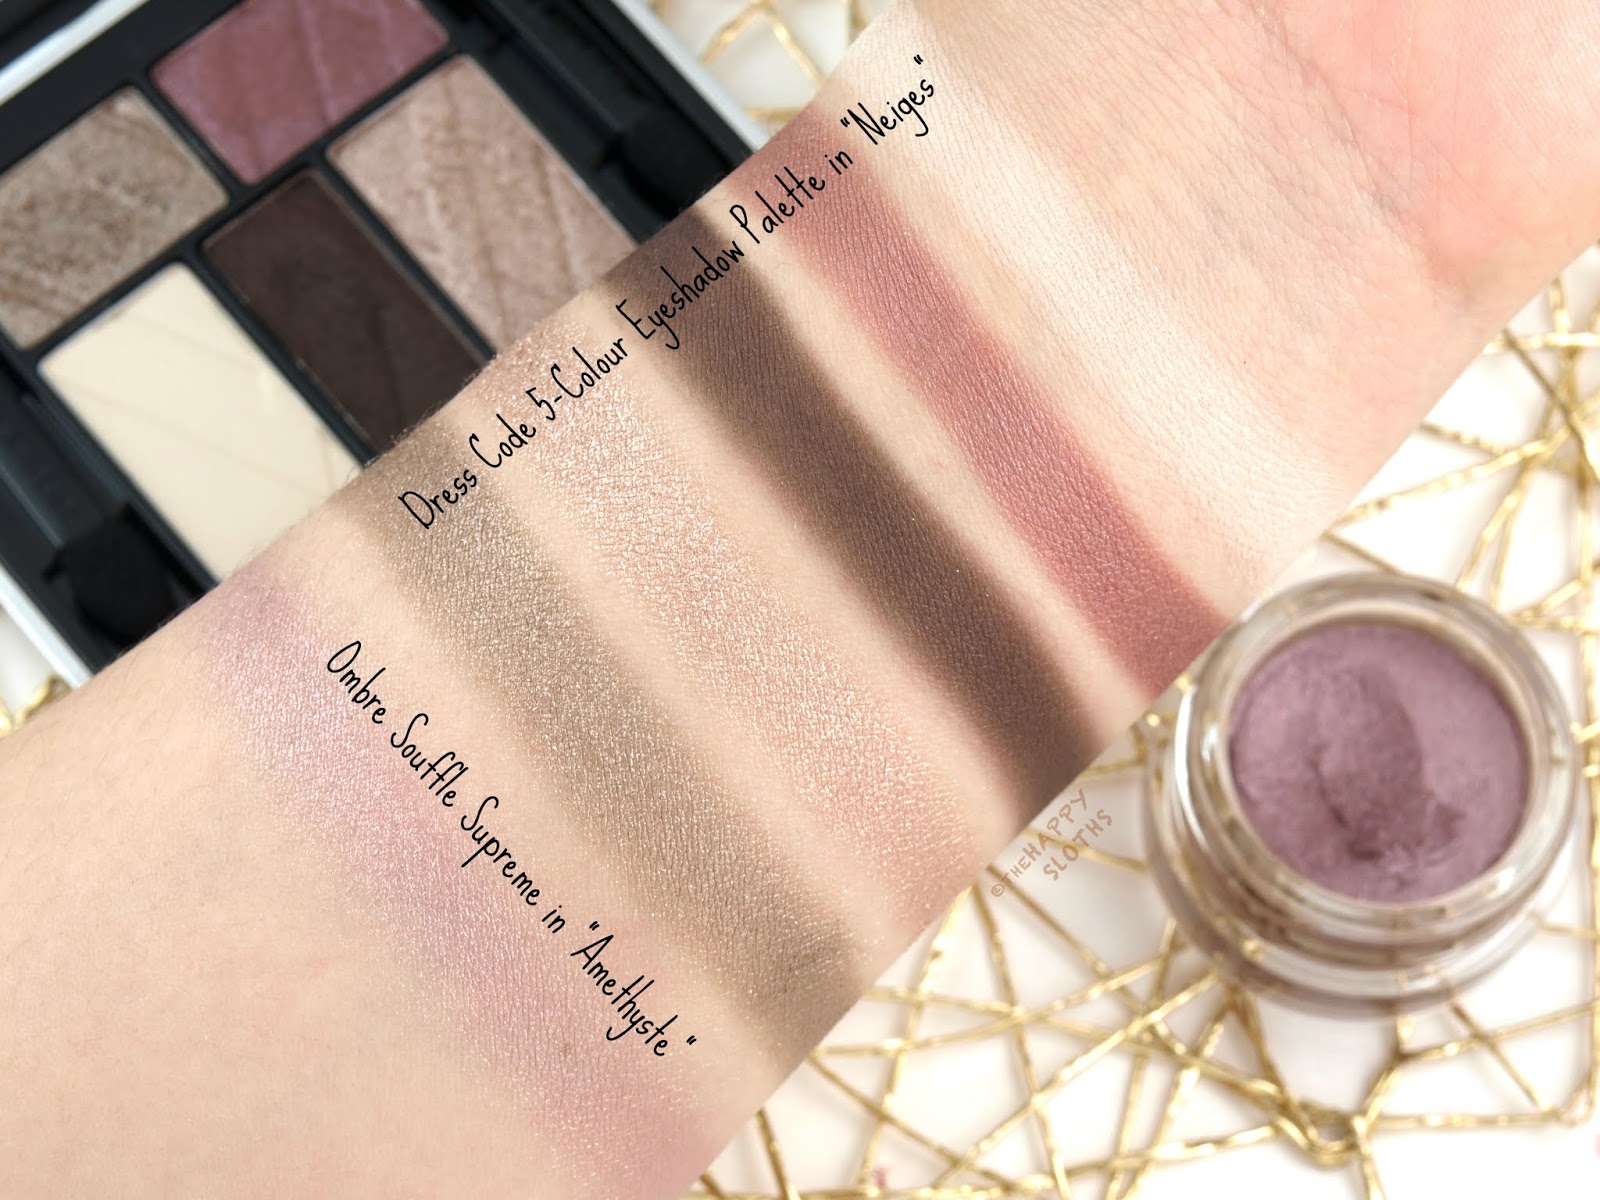 Lise Watier Holiday 2018 | Neiges Dress Code 5-Colour Eyeshadow Palette: Review and Swatches